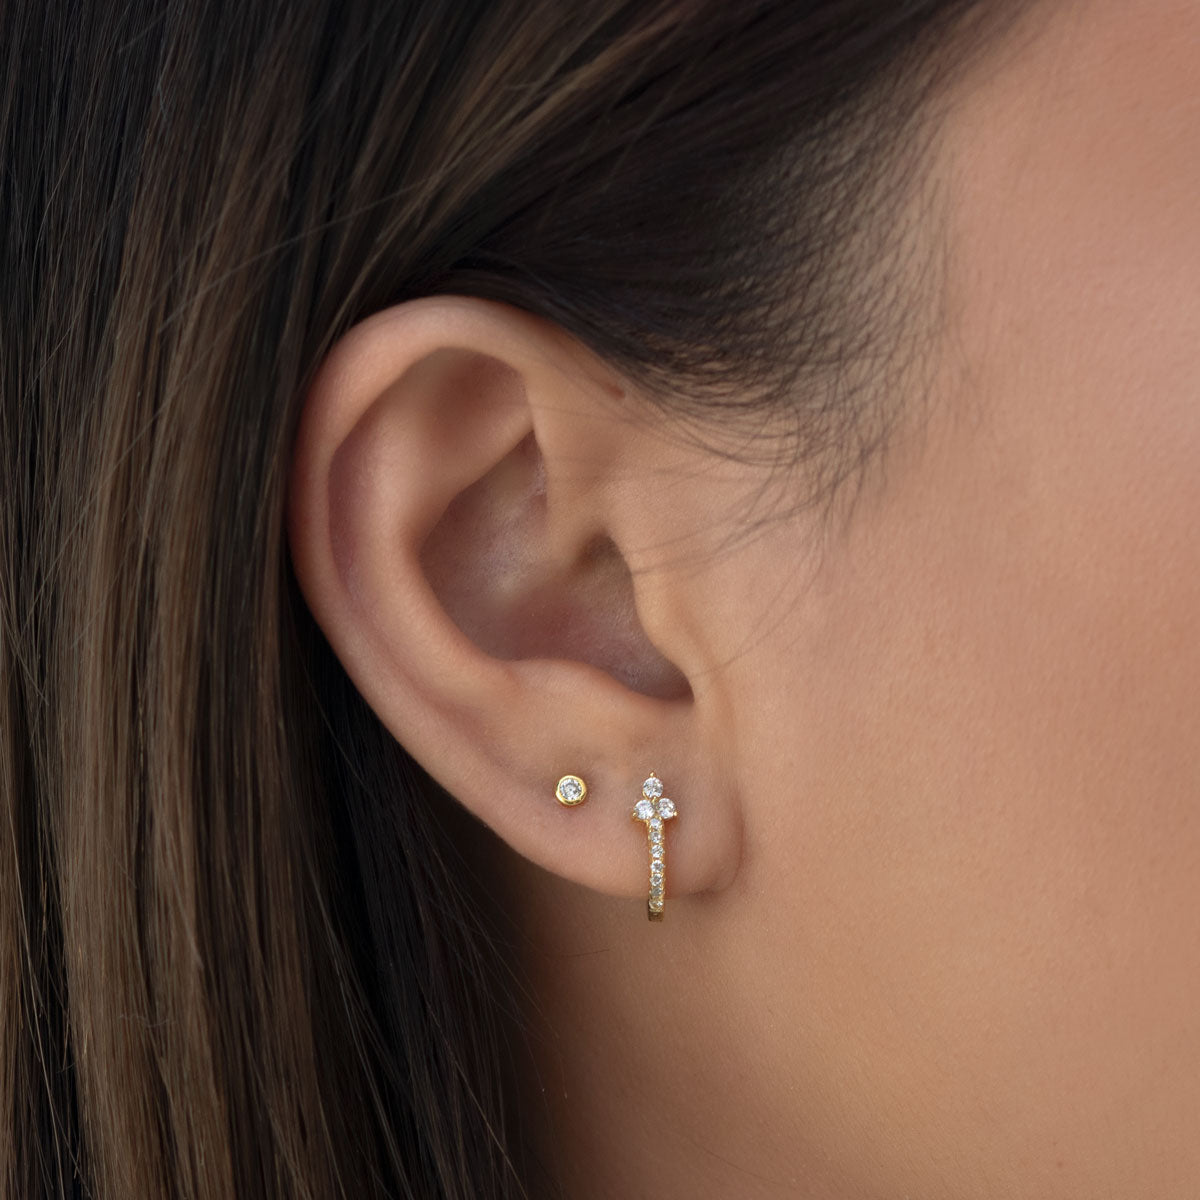 caption: Model wearing 3mm on second hole